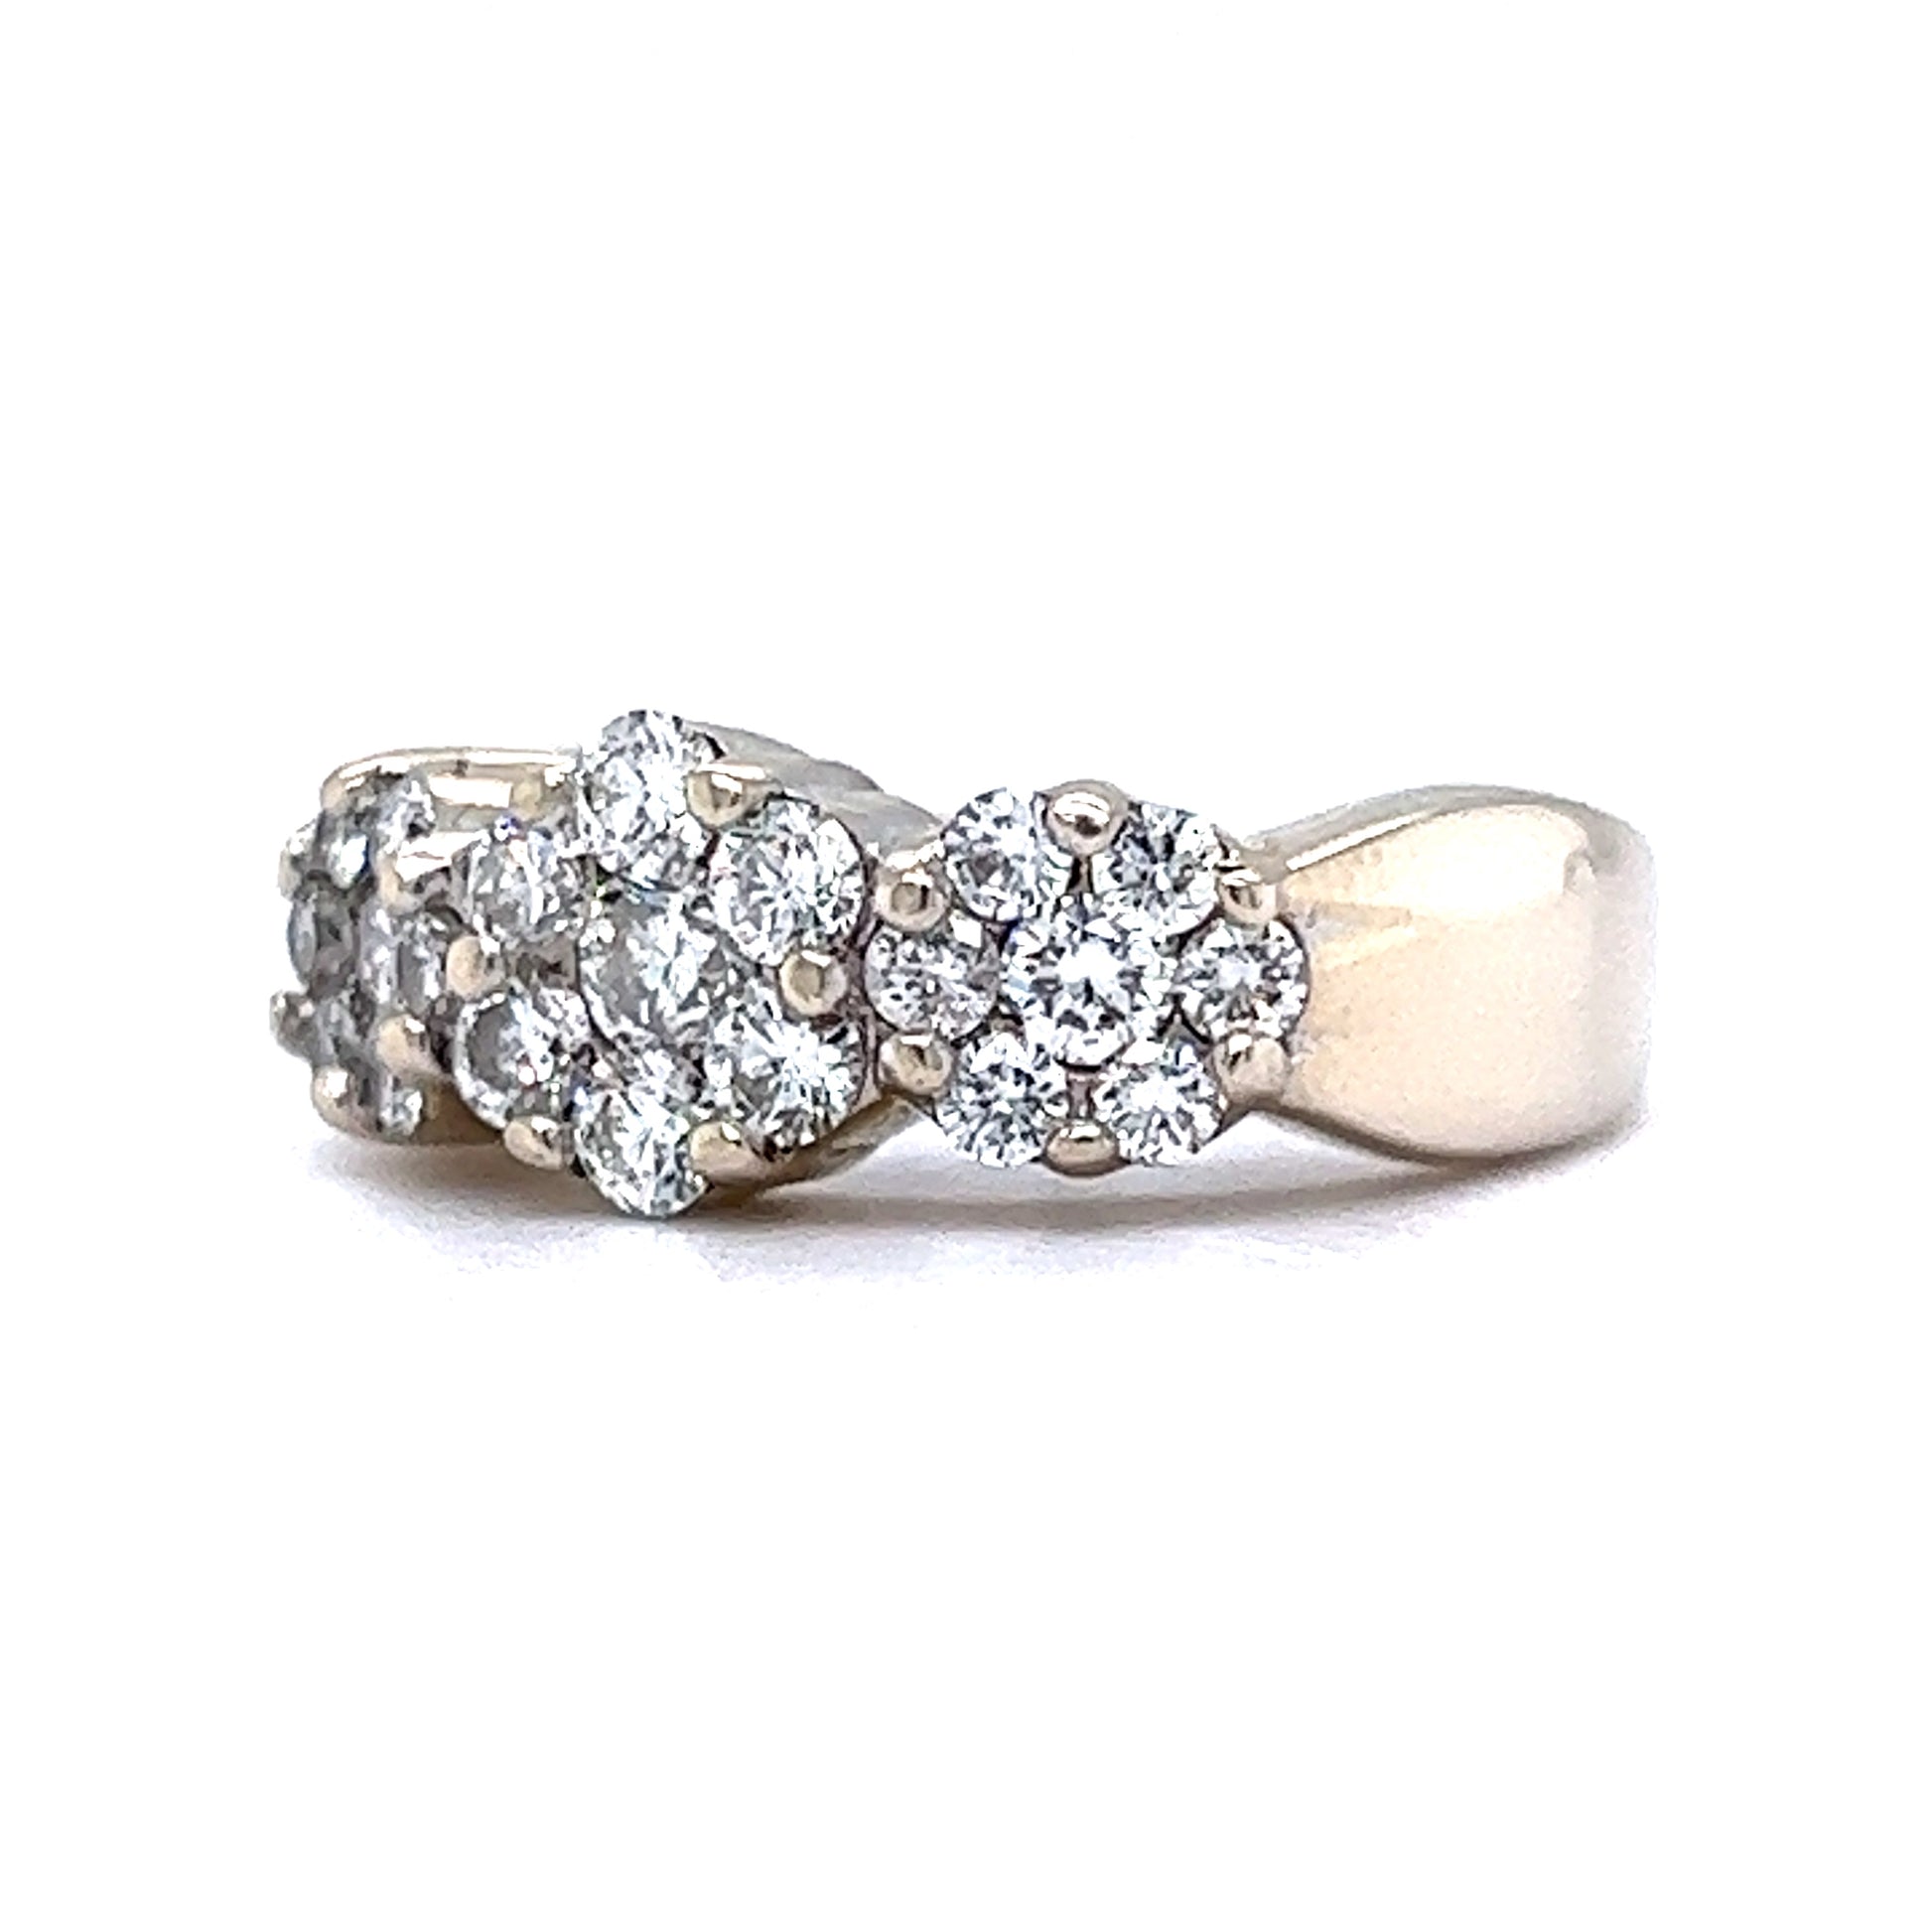 Cluster Pave Diamond Cocktail Ring in 14k White Gold